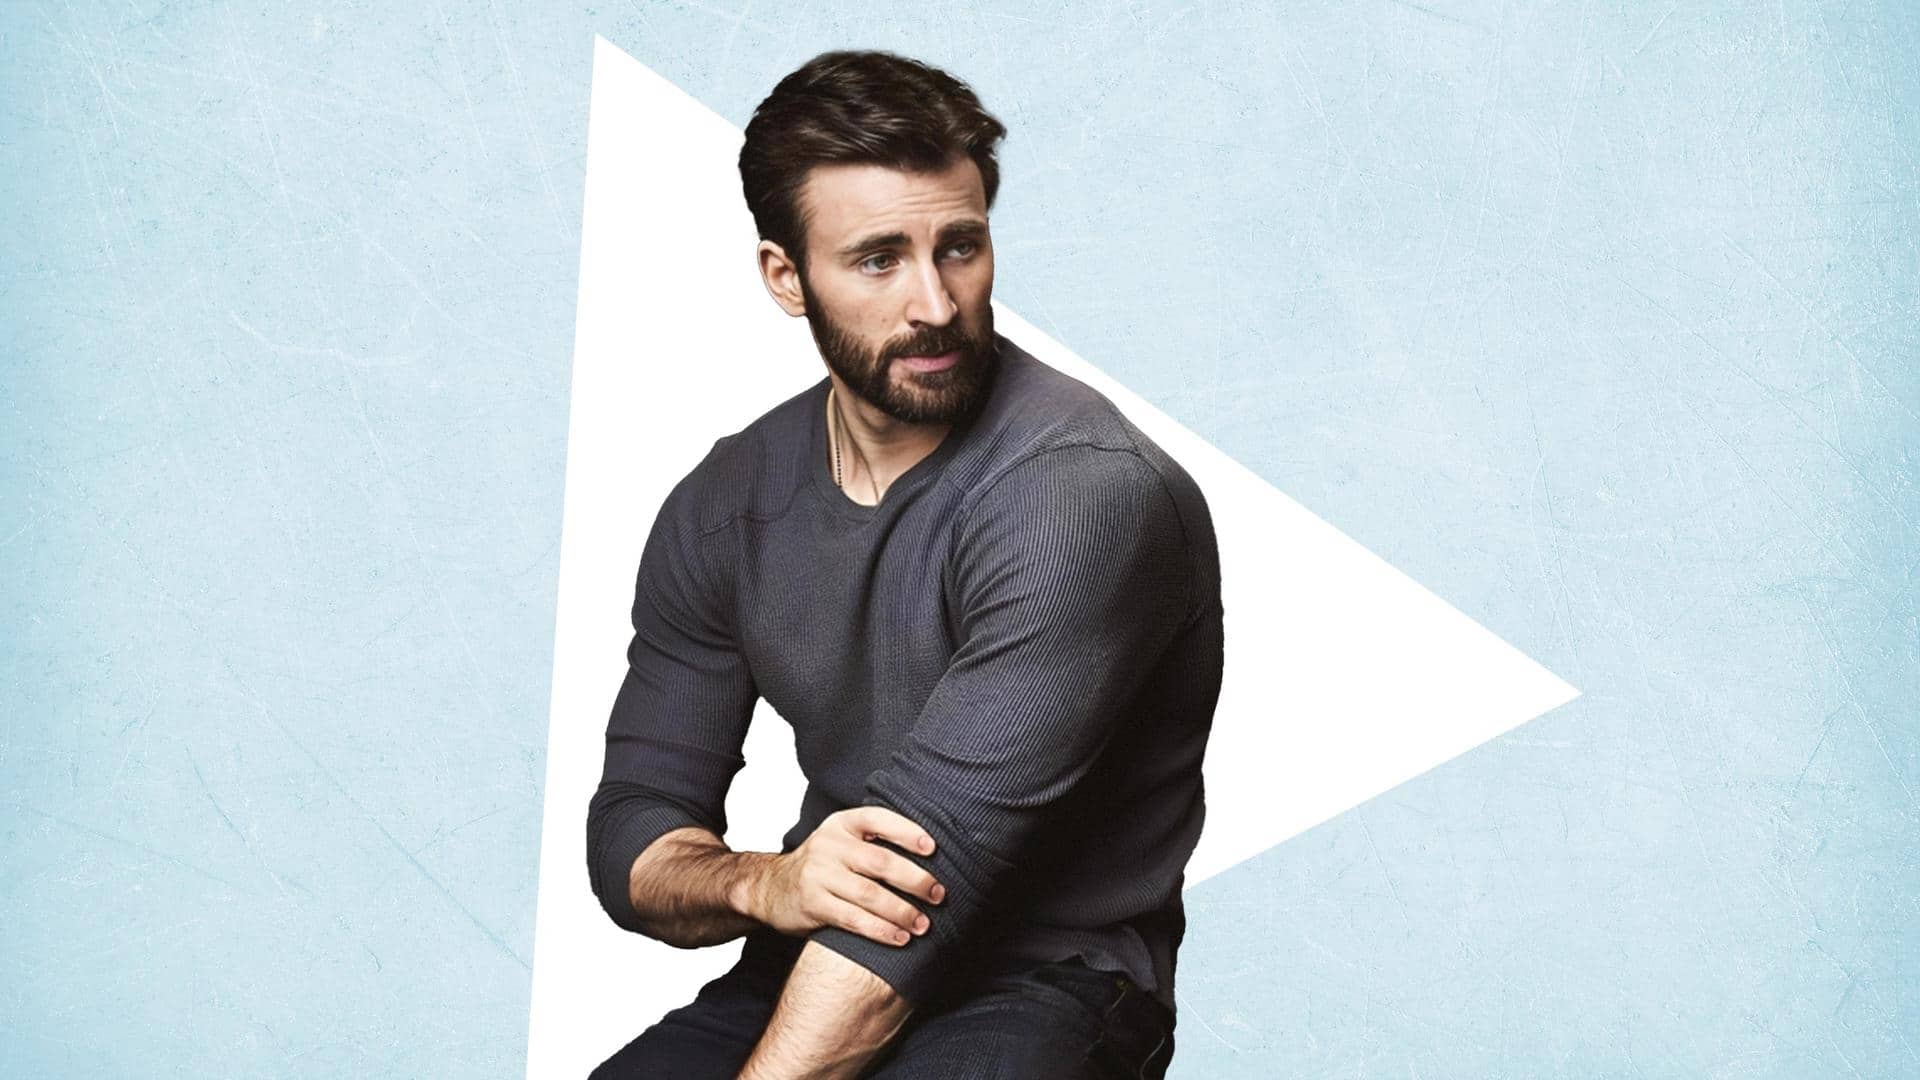 Happy birthday, Chris Evans: Notable non-MCU projects of the actor